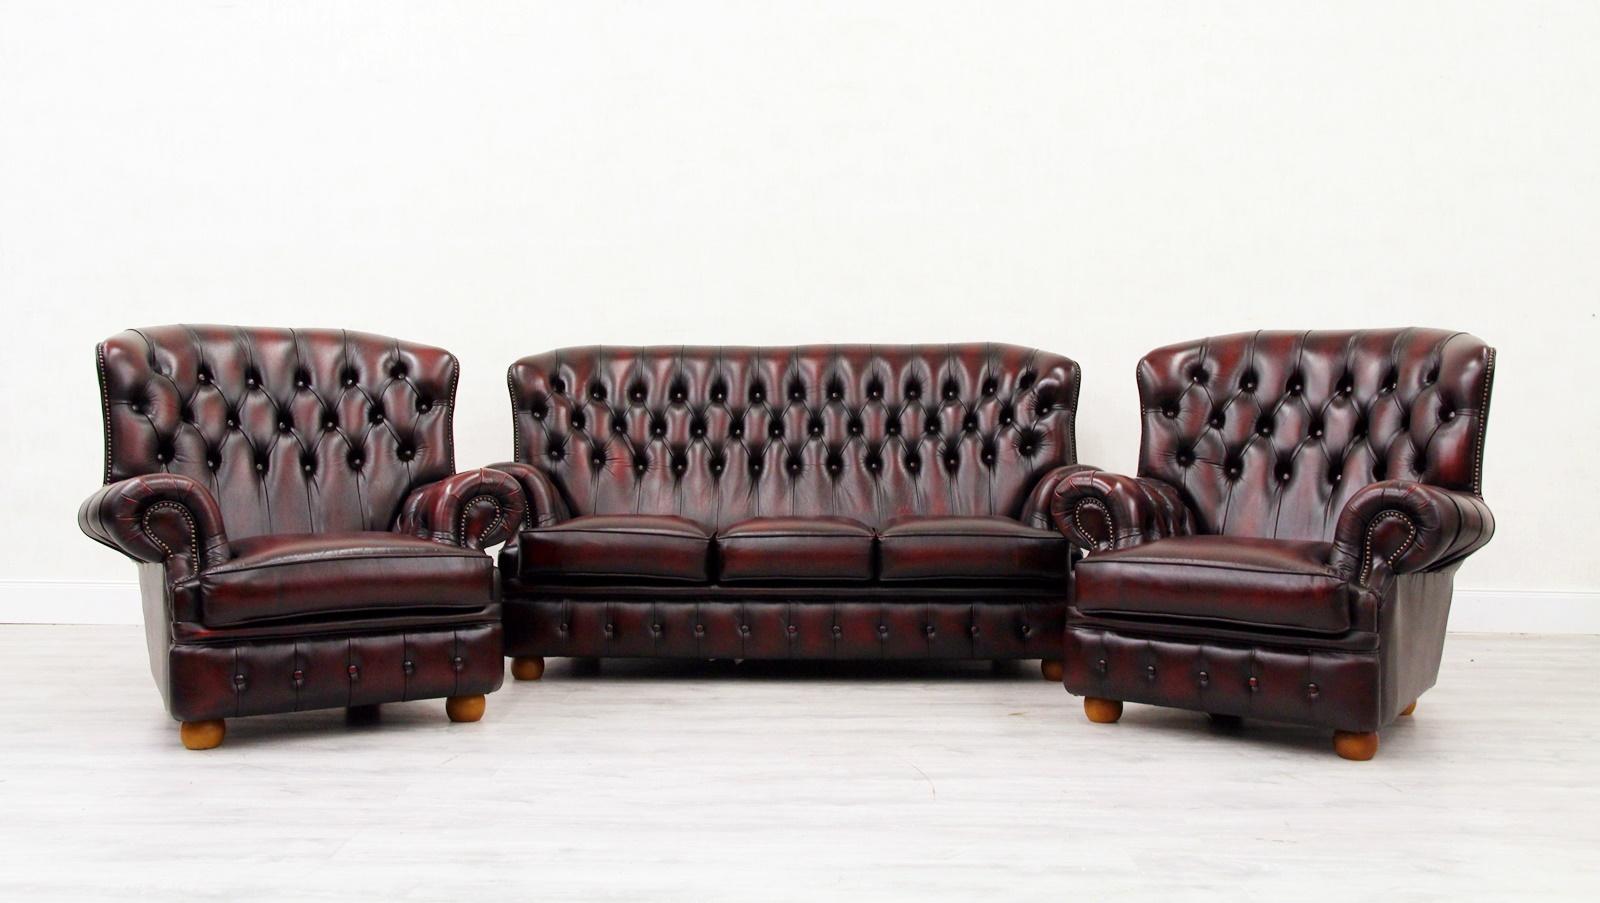 Chesterfield real leather threesome sofa
in original design.

Condition: The sofa is in a very good condition (Mint condition)
sofa
Measures: Height x 100 cm, length x 190 cm, depth x 90 cm
Upholstery is in good condition with patina (see